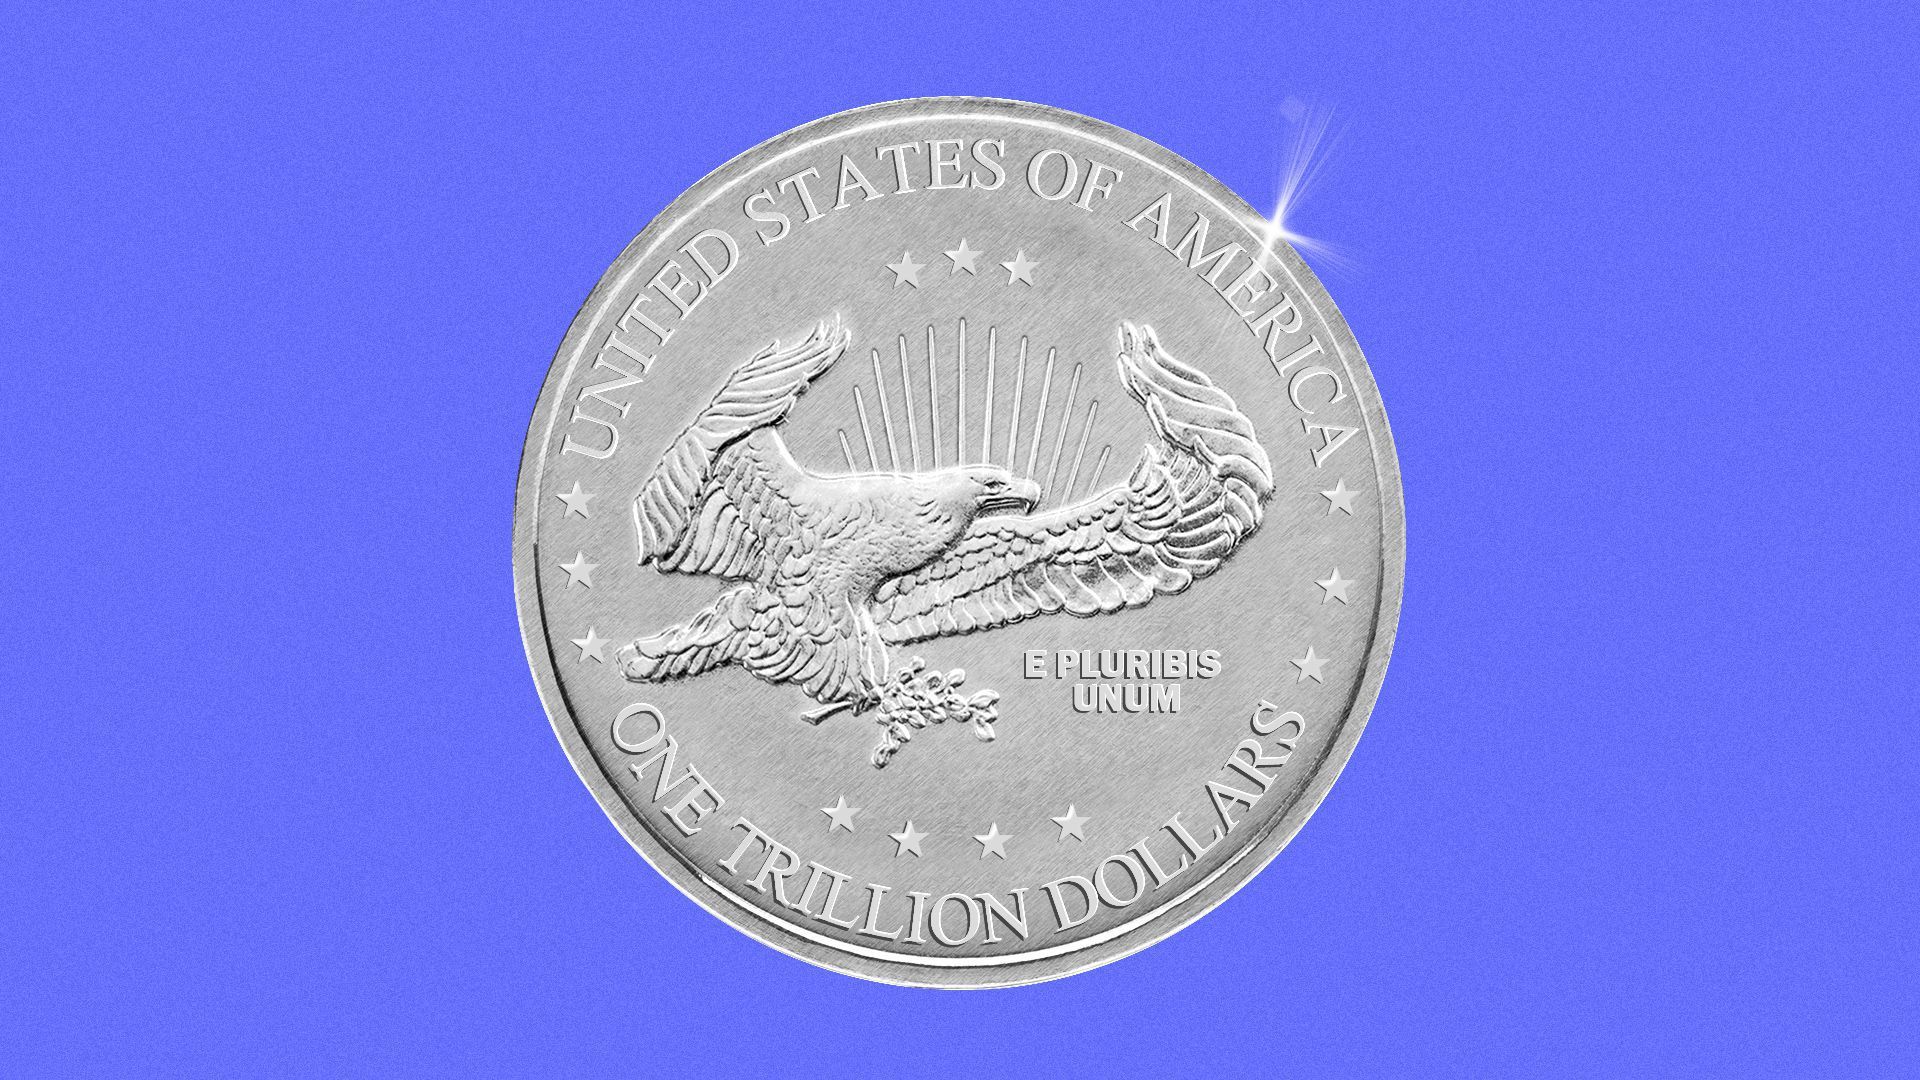 Illustration of a $1 trillion U.S. coin against a purple background.